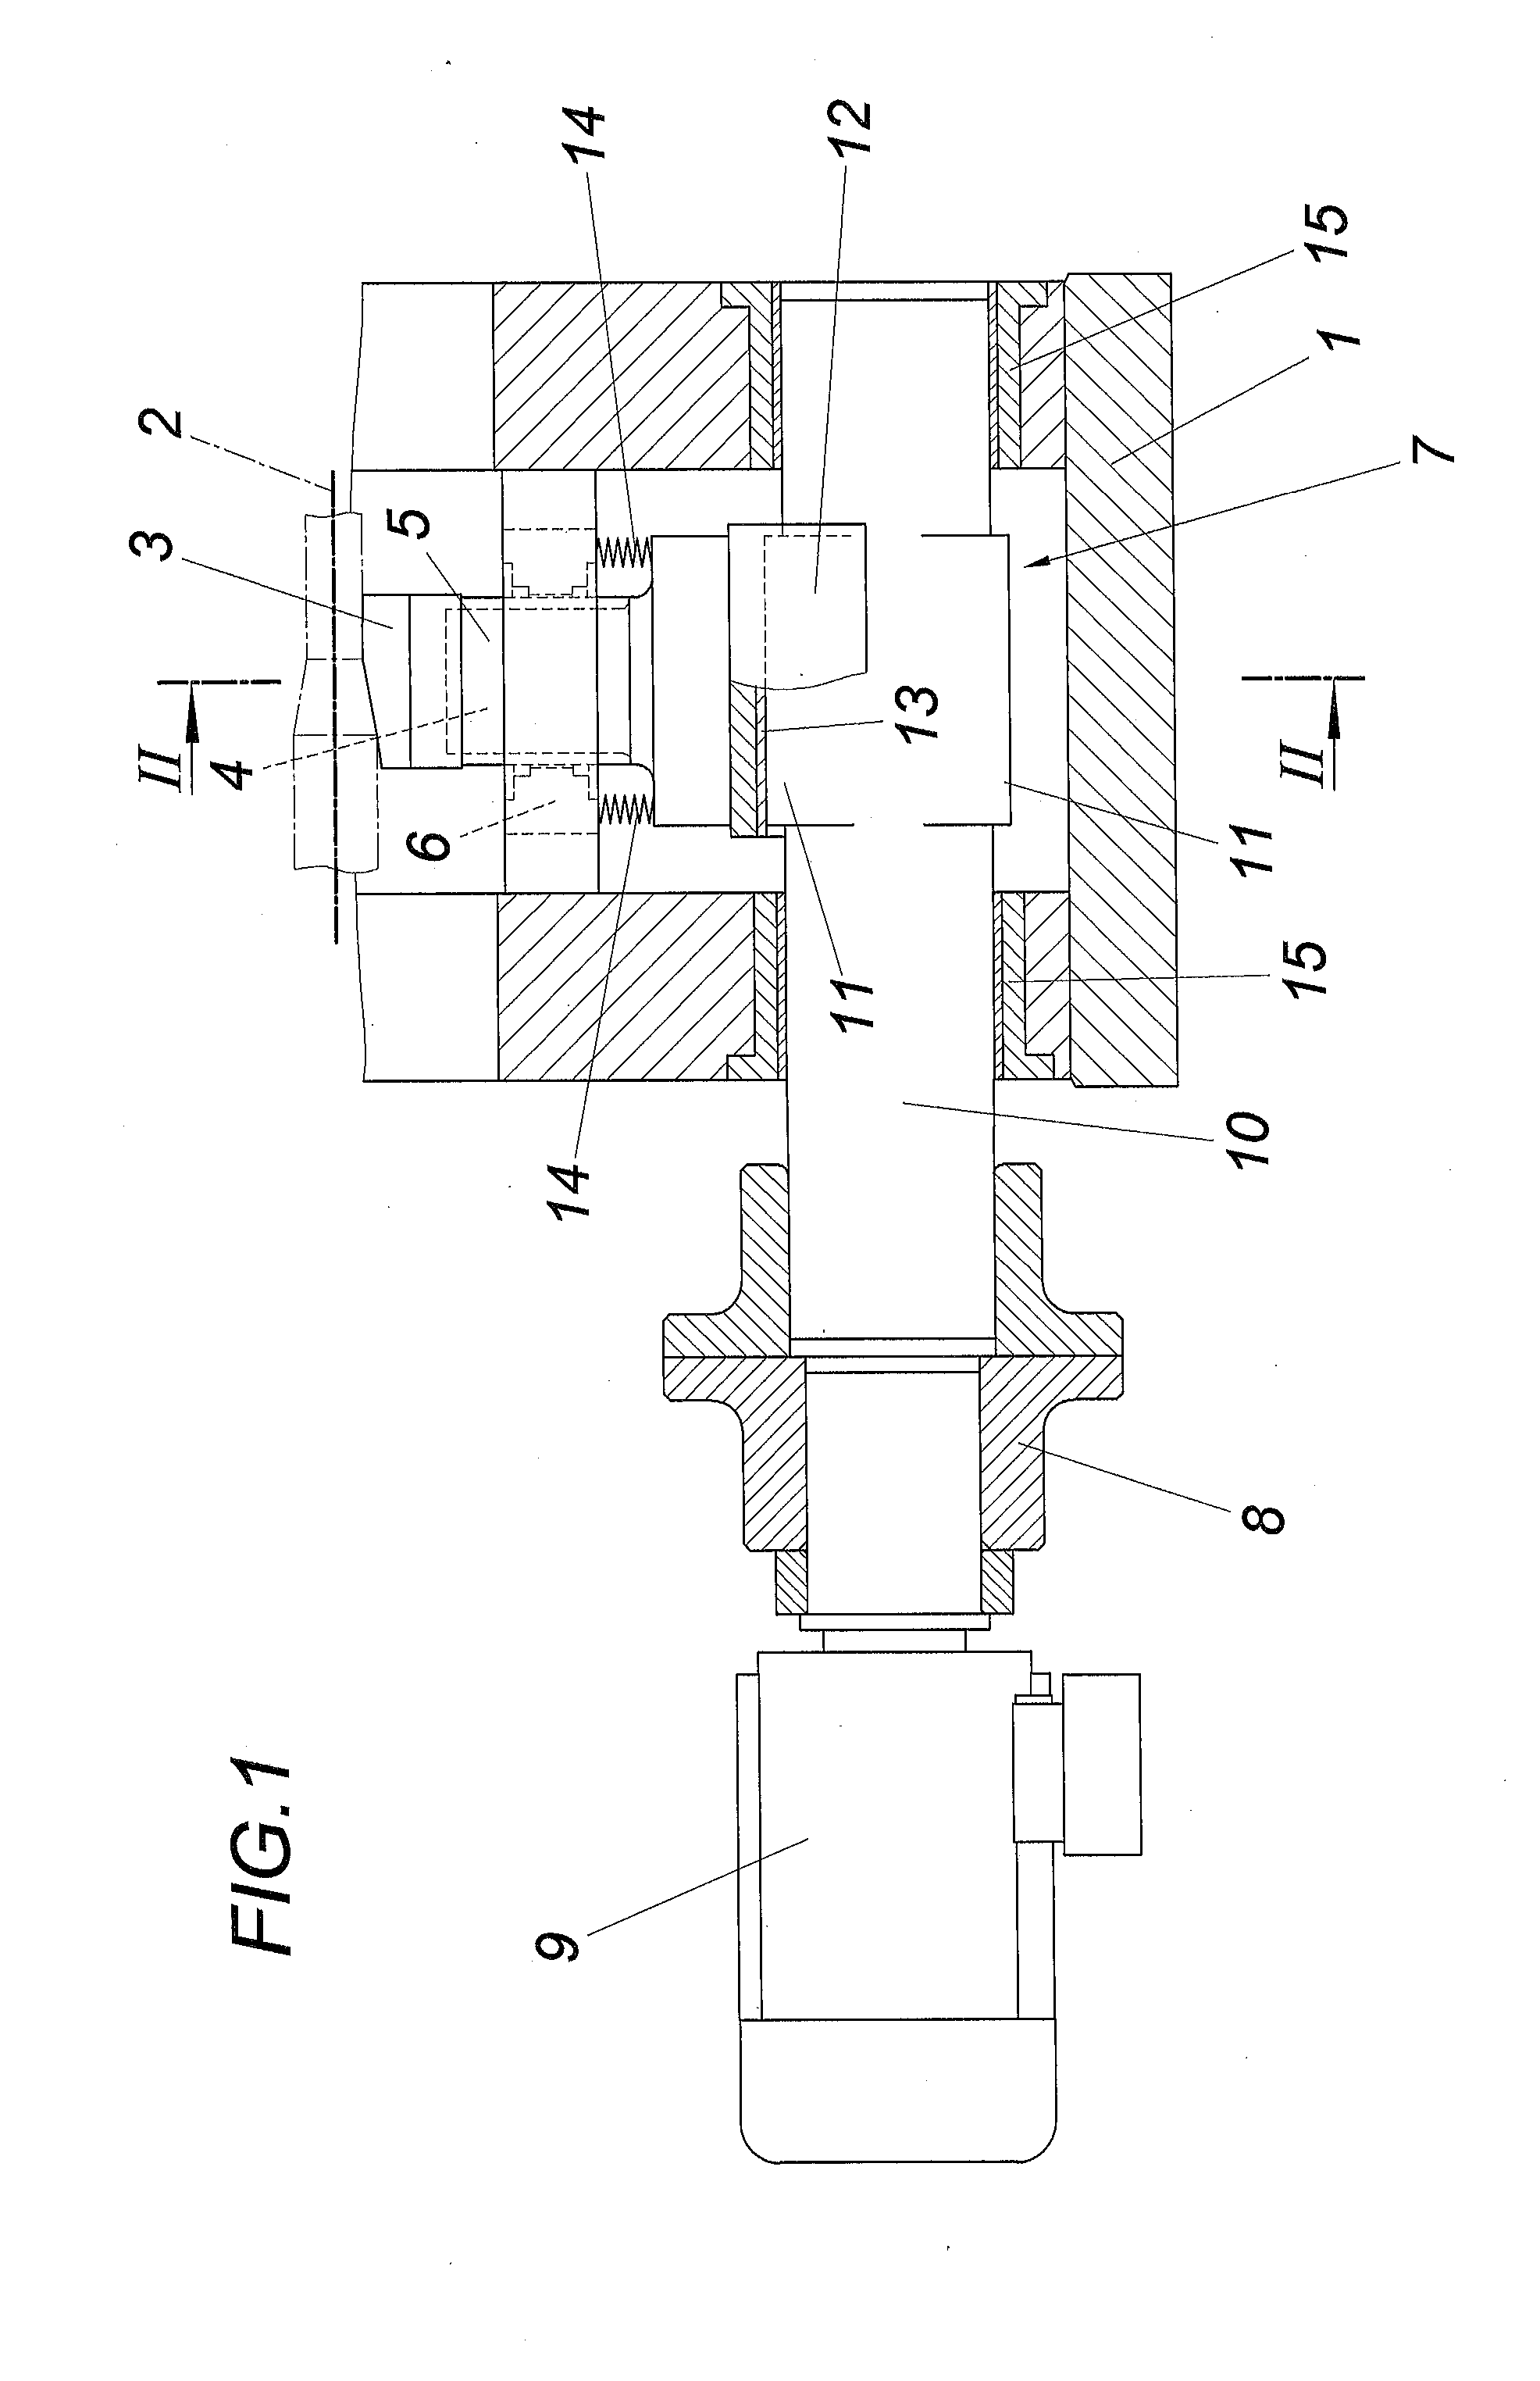 Forging apparatus with forging rams guided in the direction of stroke and accommodating forging tools